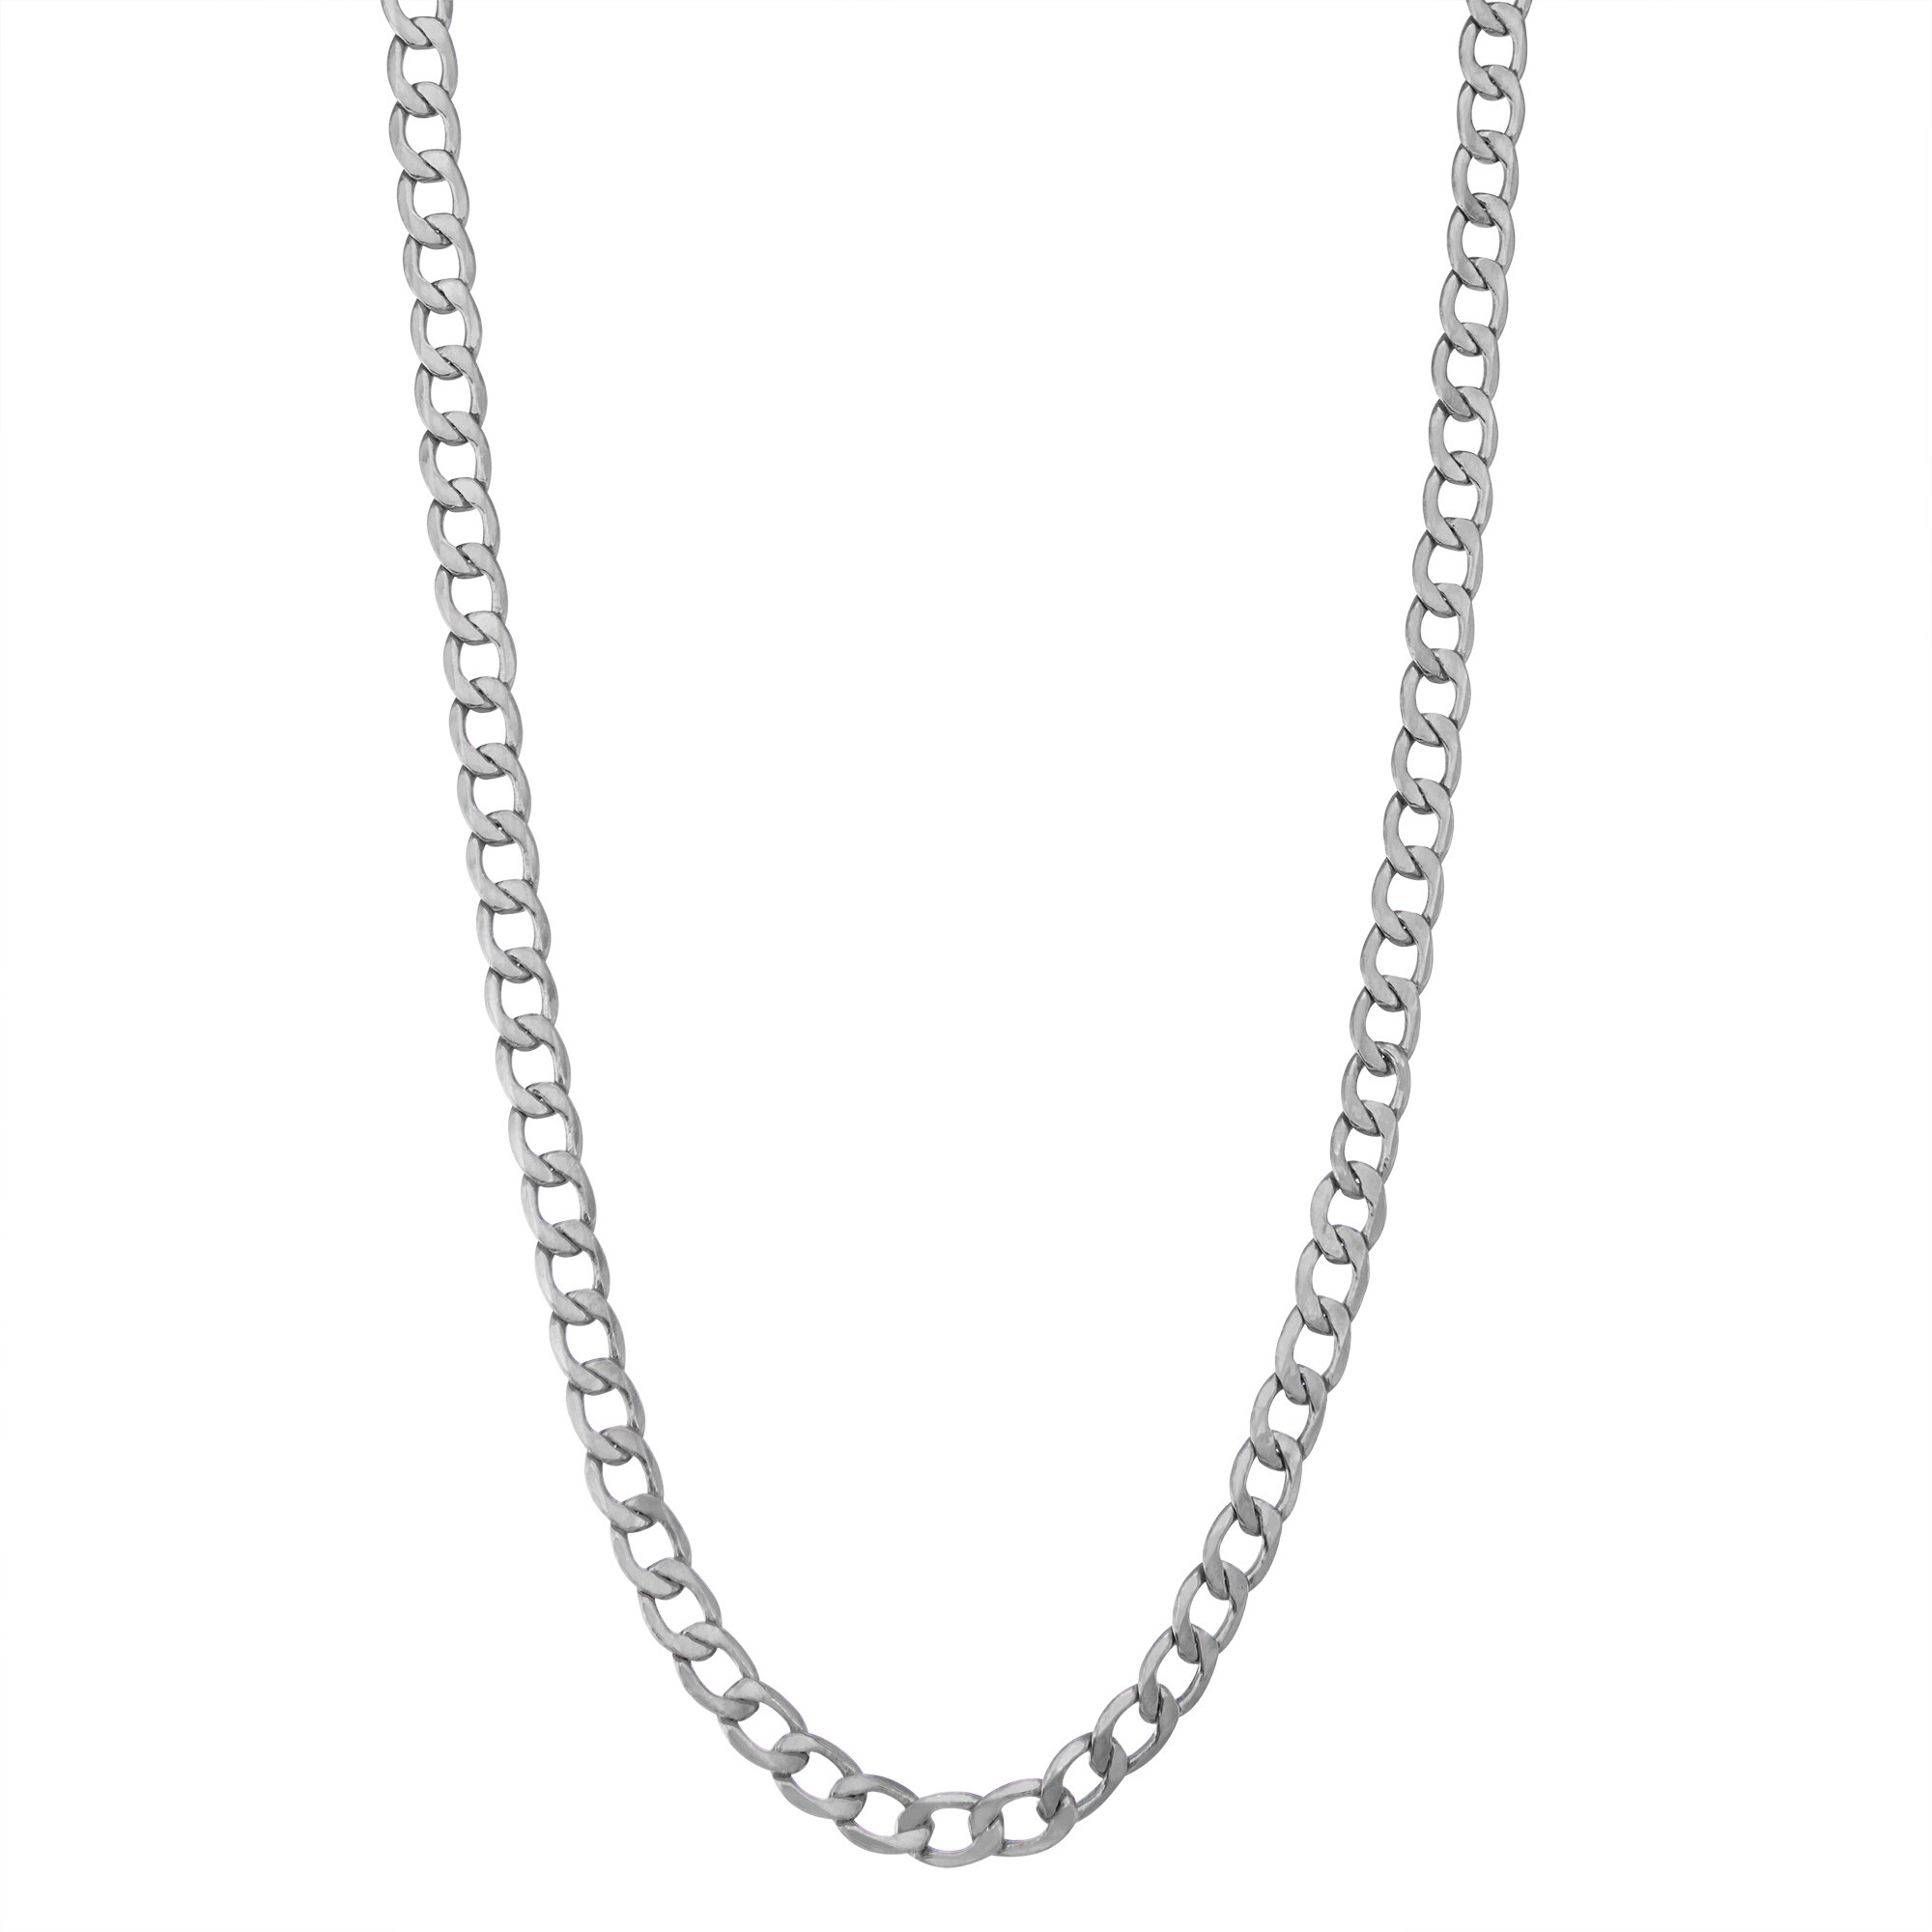 10K White Gold 5.3mm Men's Curb Chain Necklace By Gioelli